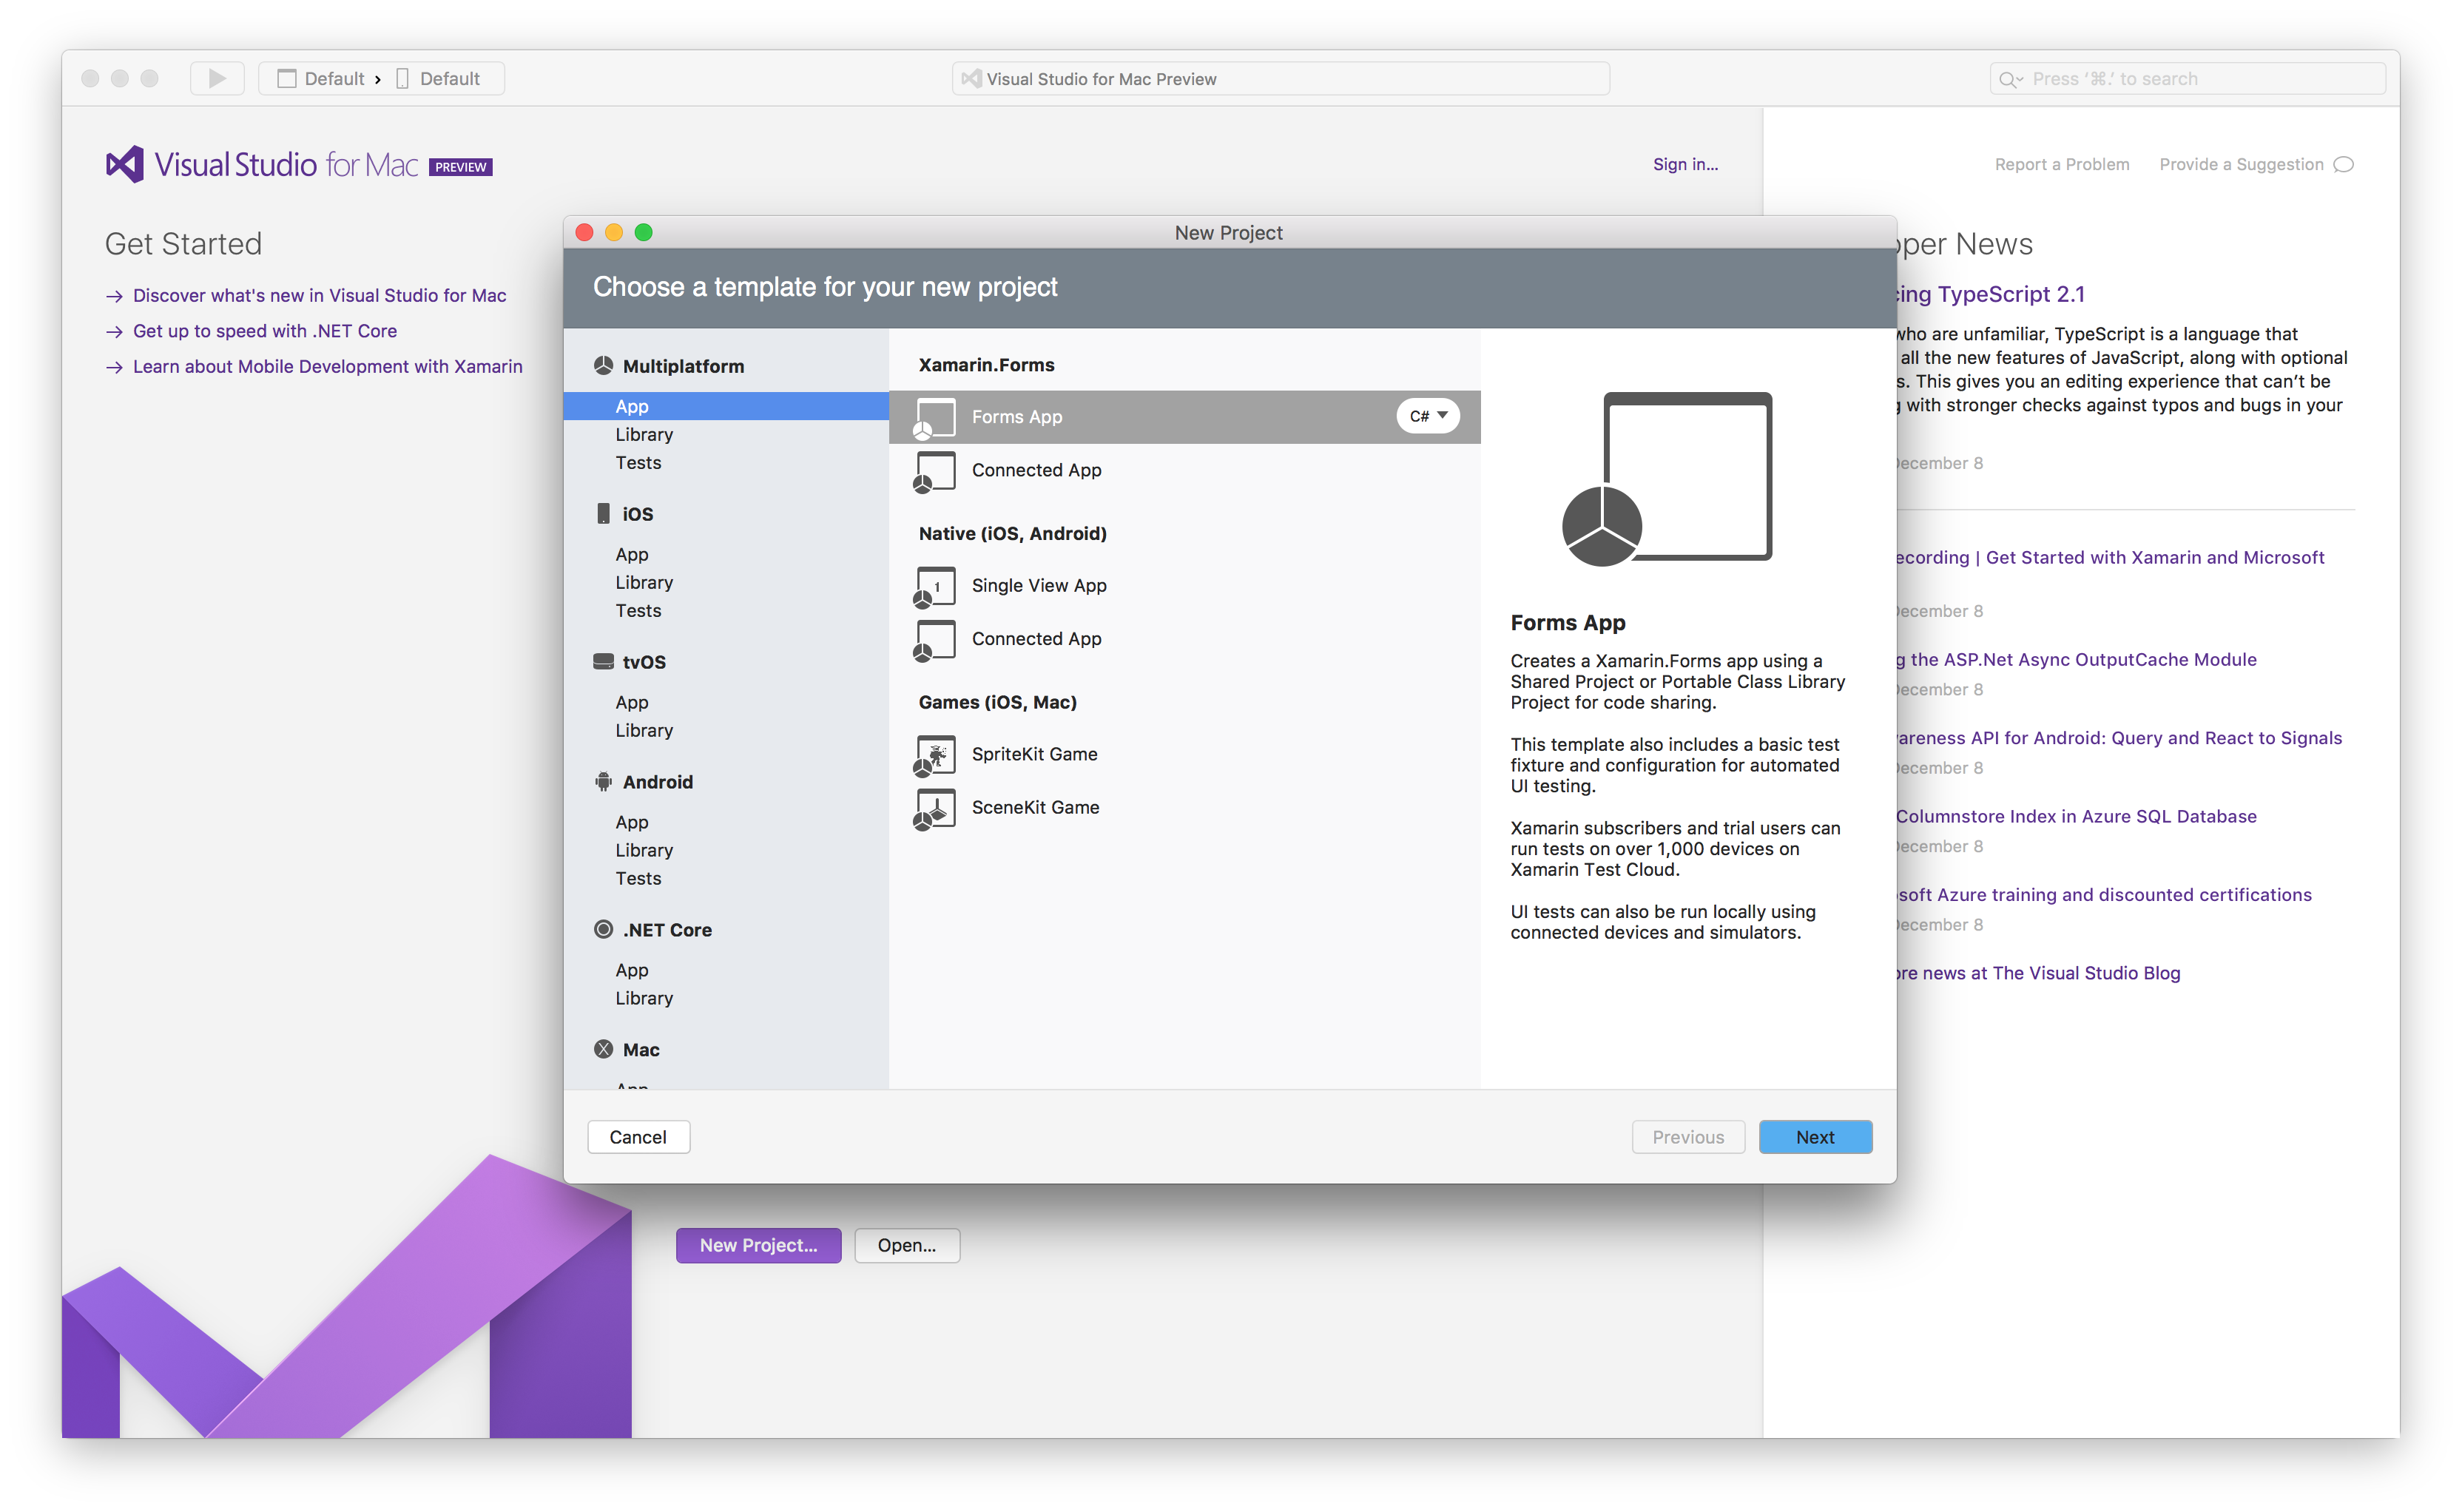 How Easy Is It To Create An Api And Push To Azure In Visual Studio For Mac